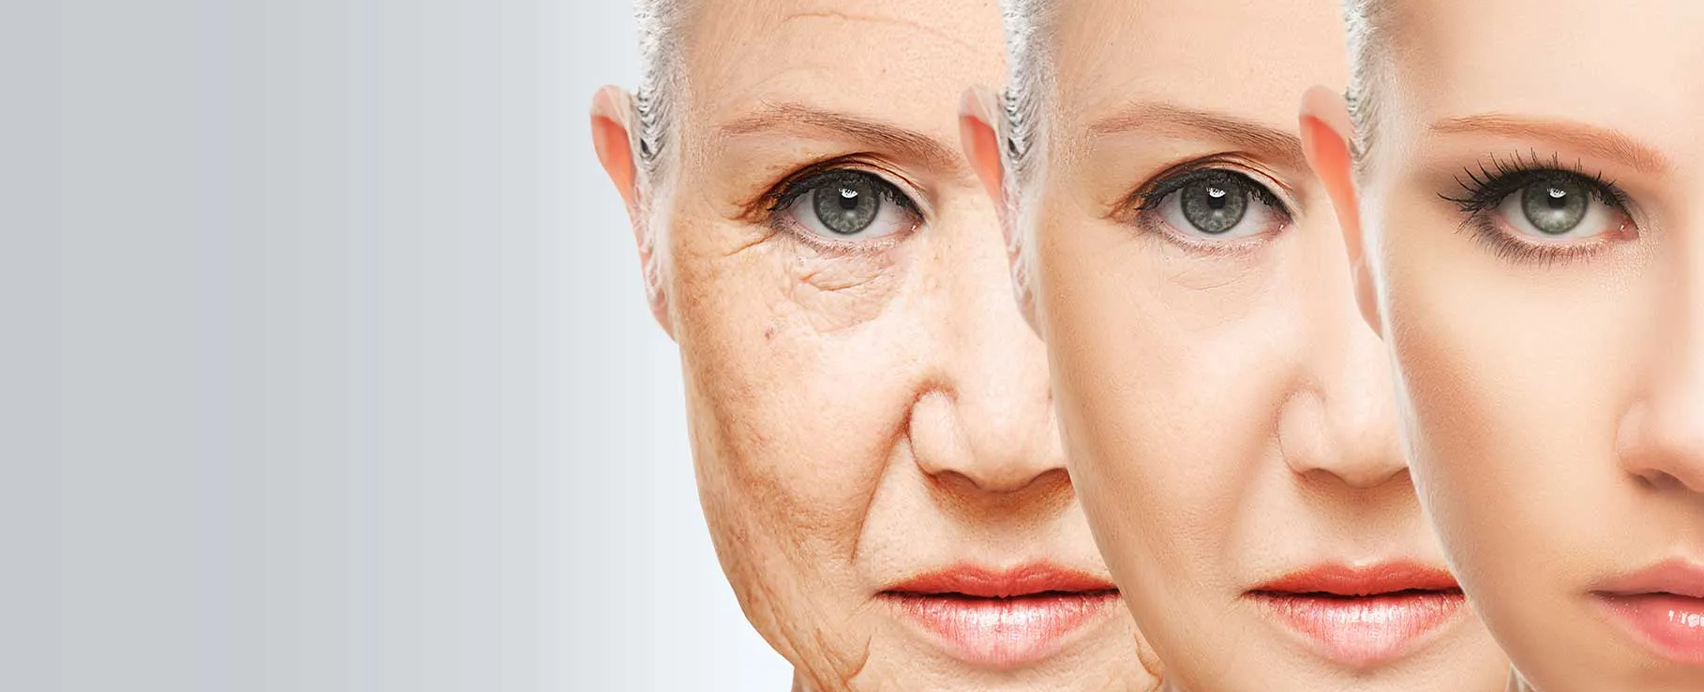 BEST ANTI-AGING TREATMENTS TO GET YOUNGER-LOOKING SKIN